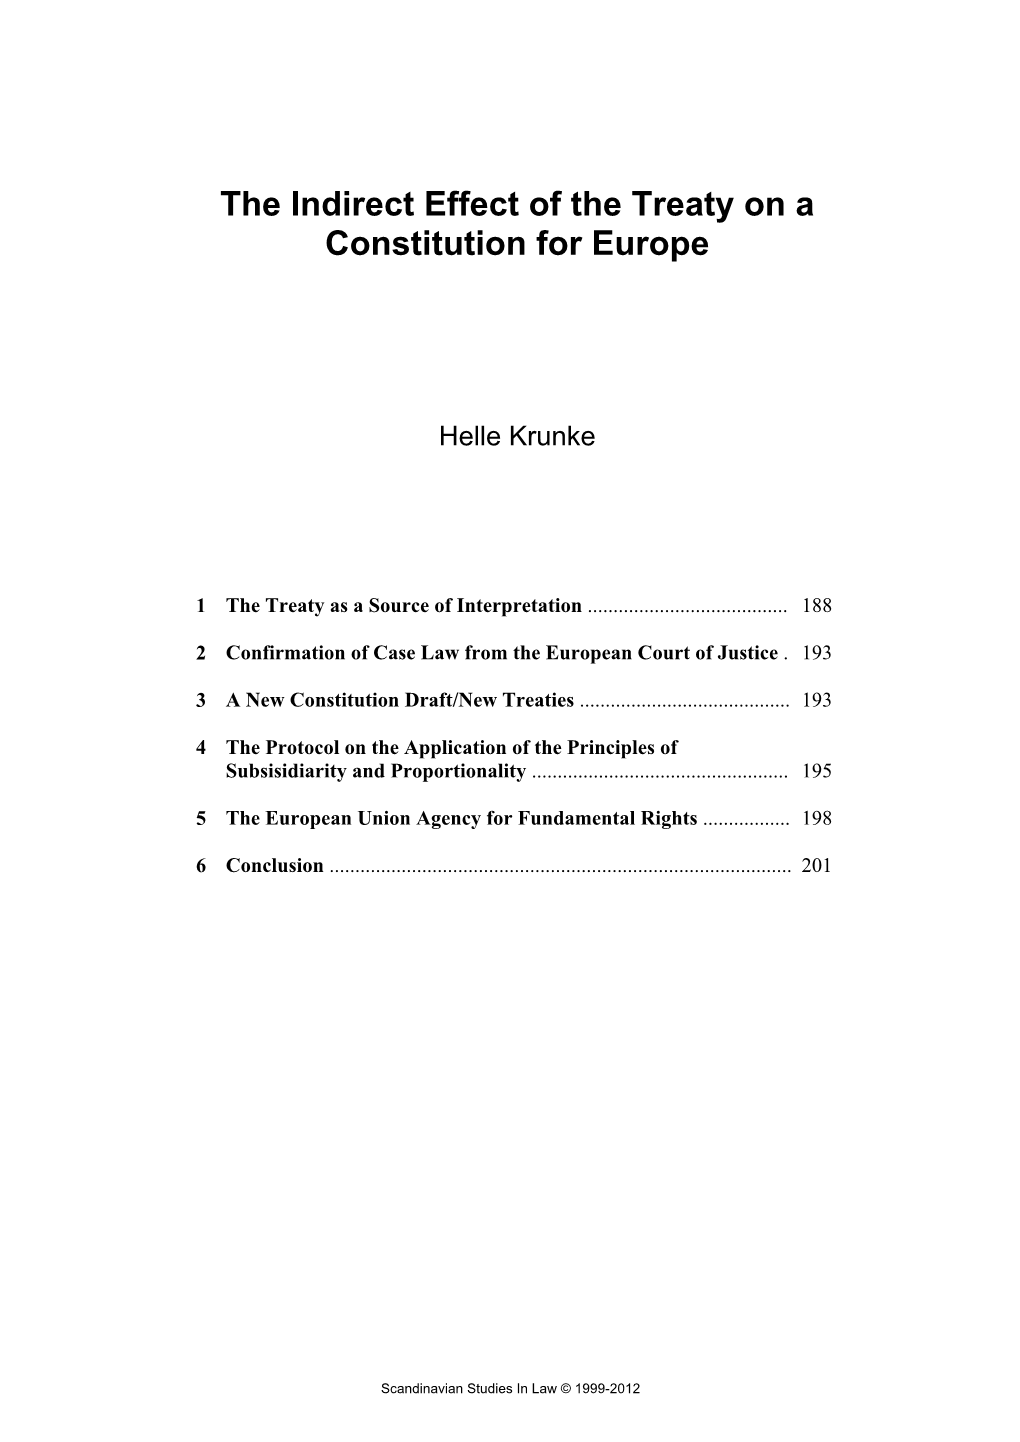 The Indirect Effect of the Treaty on a Constitution for Europe